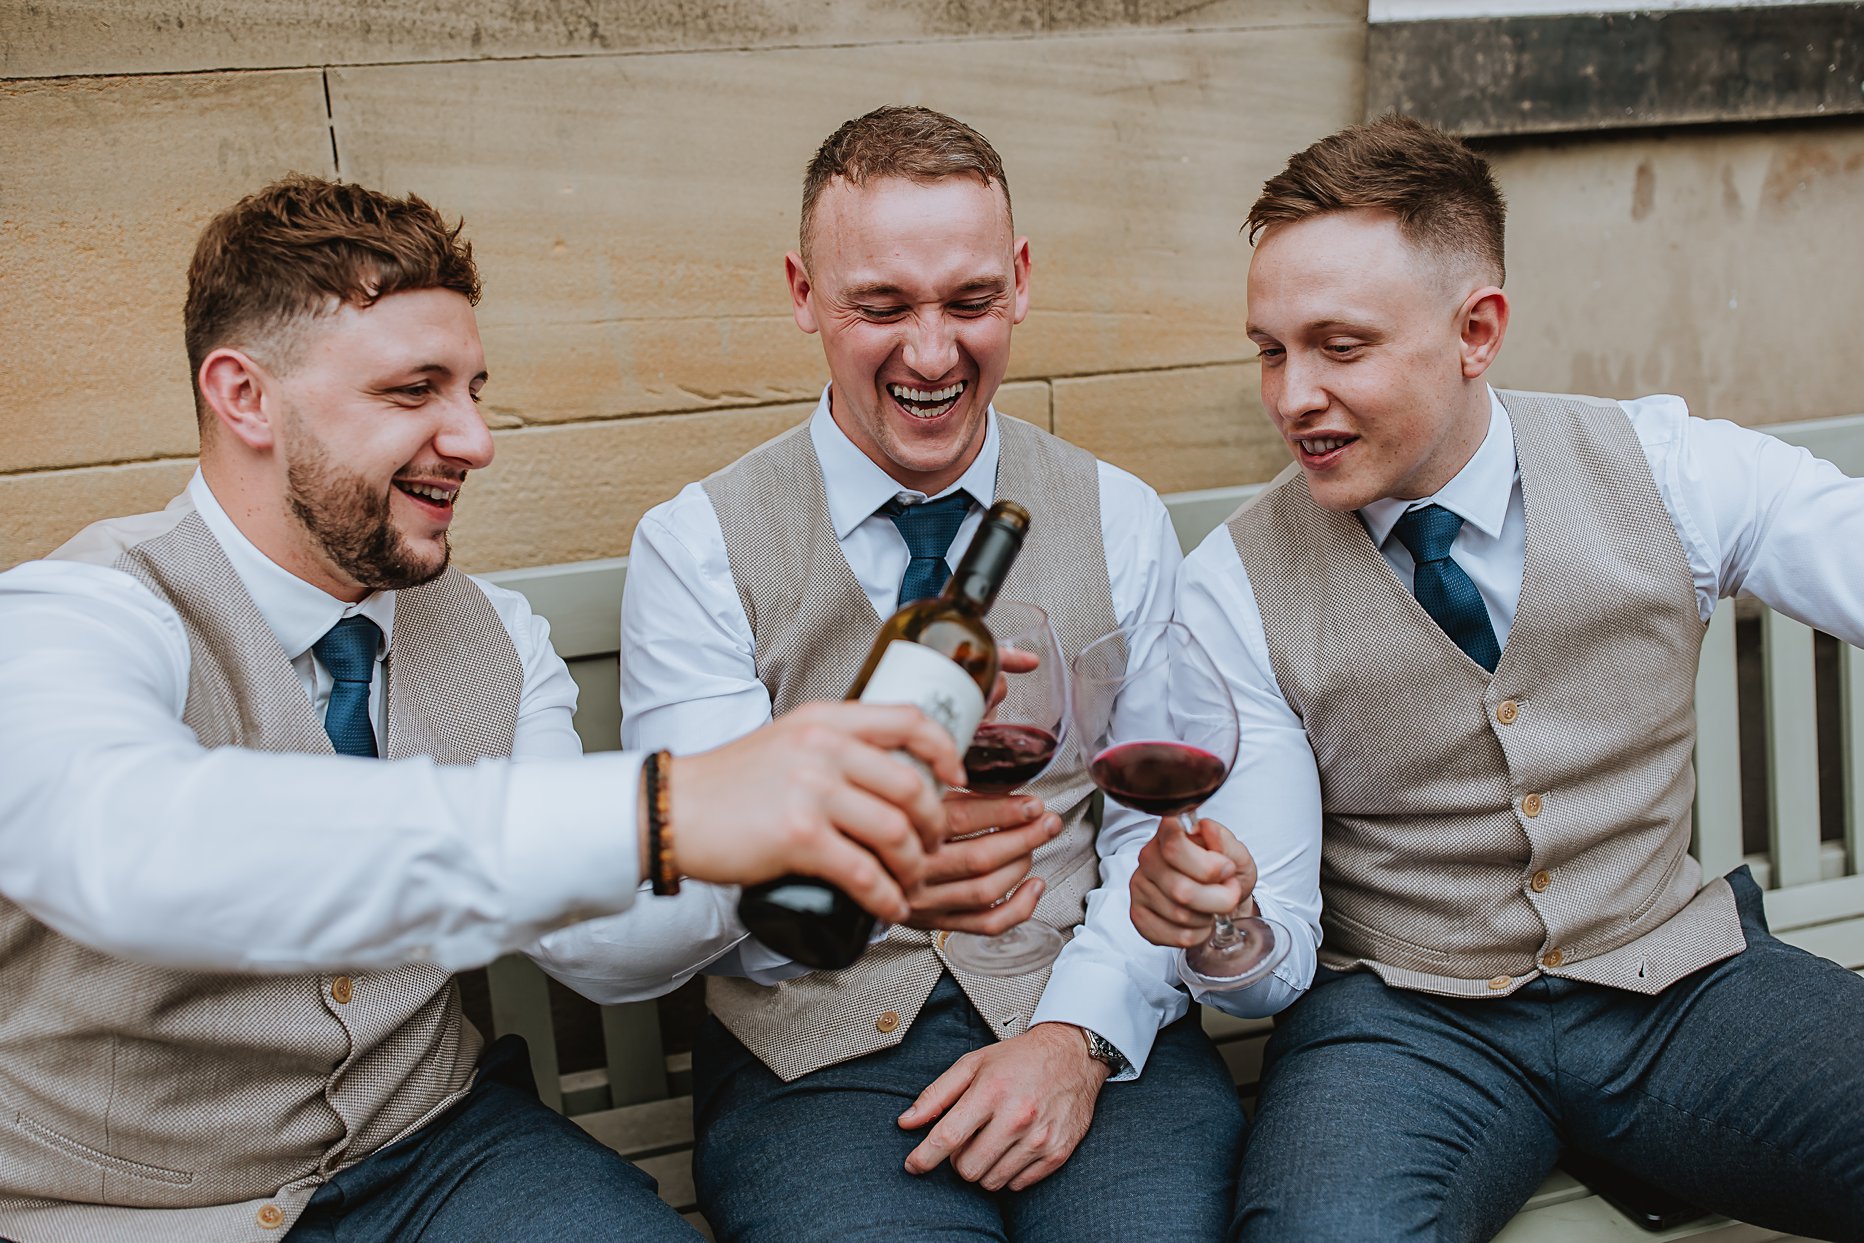 Three groomsmen sat down enjoying a glass of red wine outside Saltmarshe Hall. One groomsman is pouring the red wine while the other two laugh. They are wearing beige waistcoats and blue trousers.